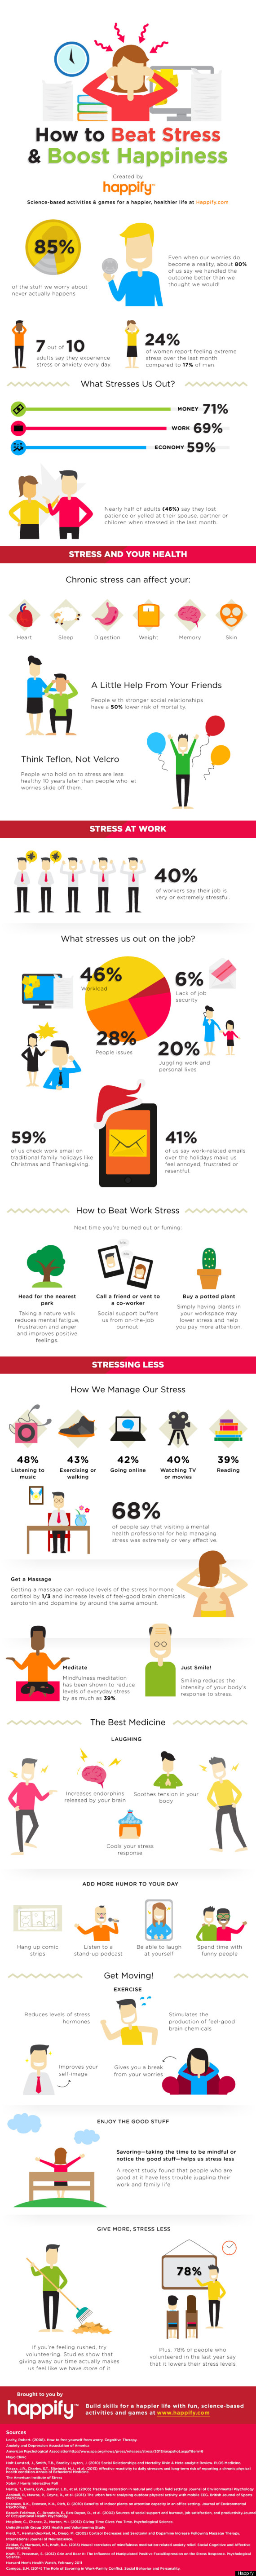 How To Boost Happiness And Beat Stress?